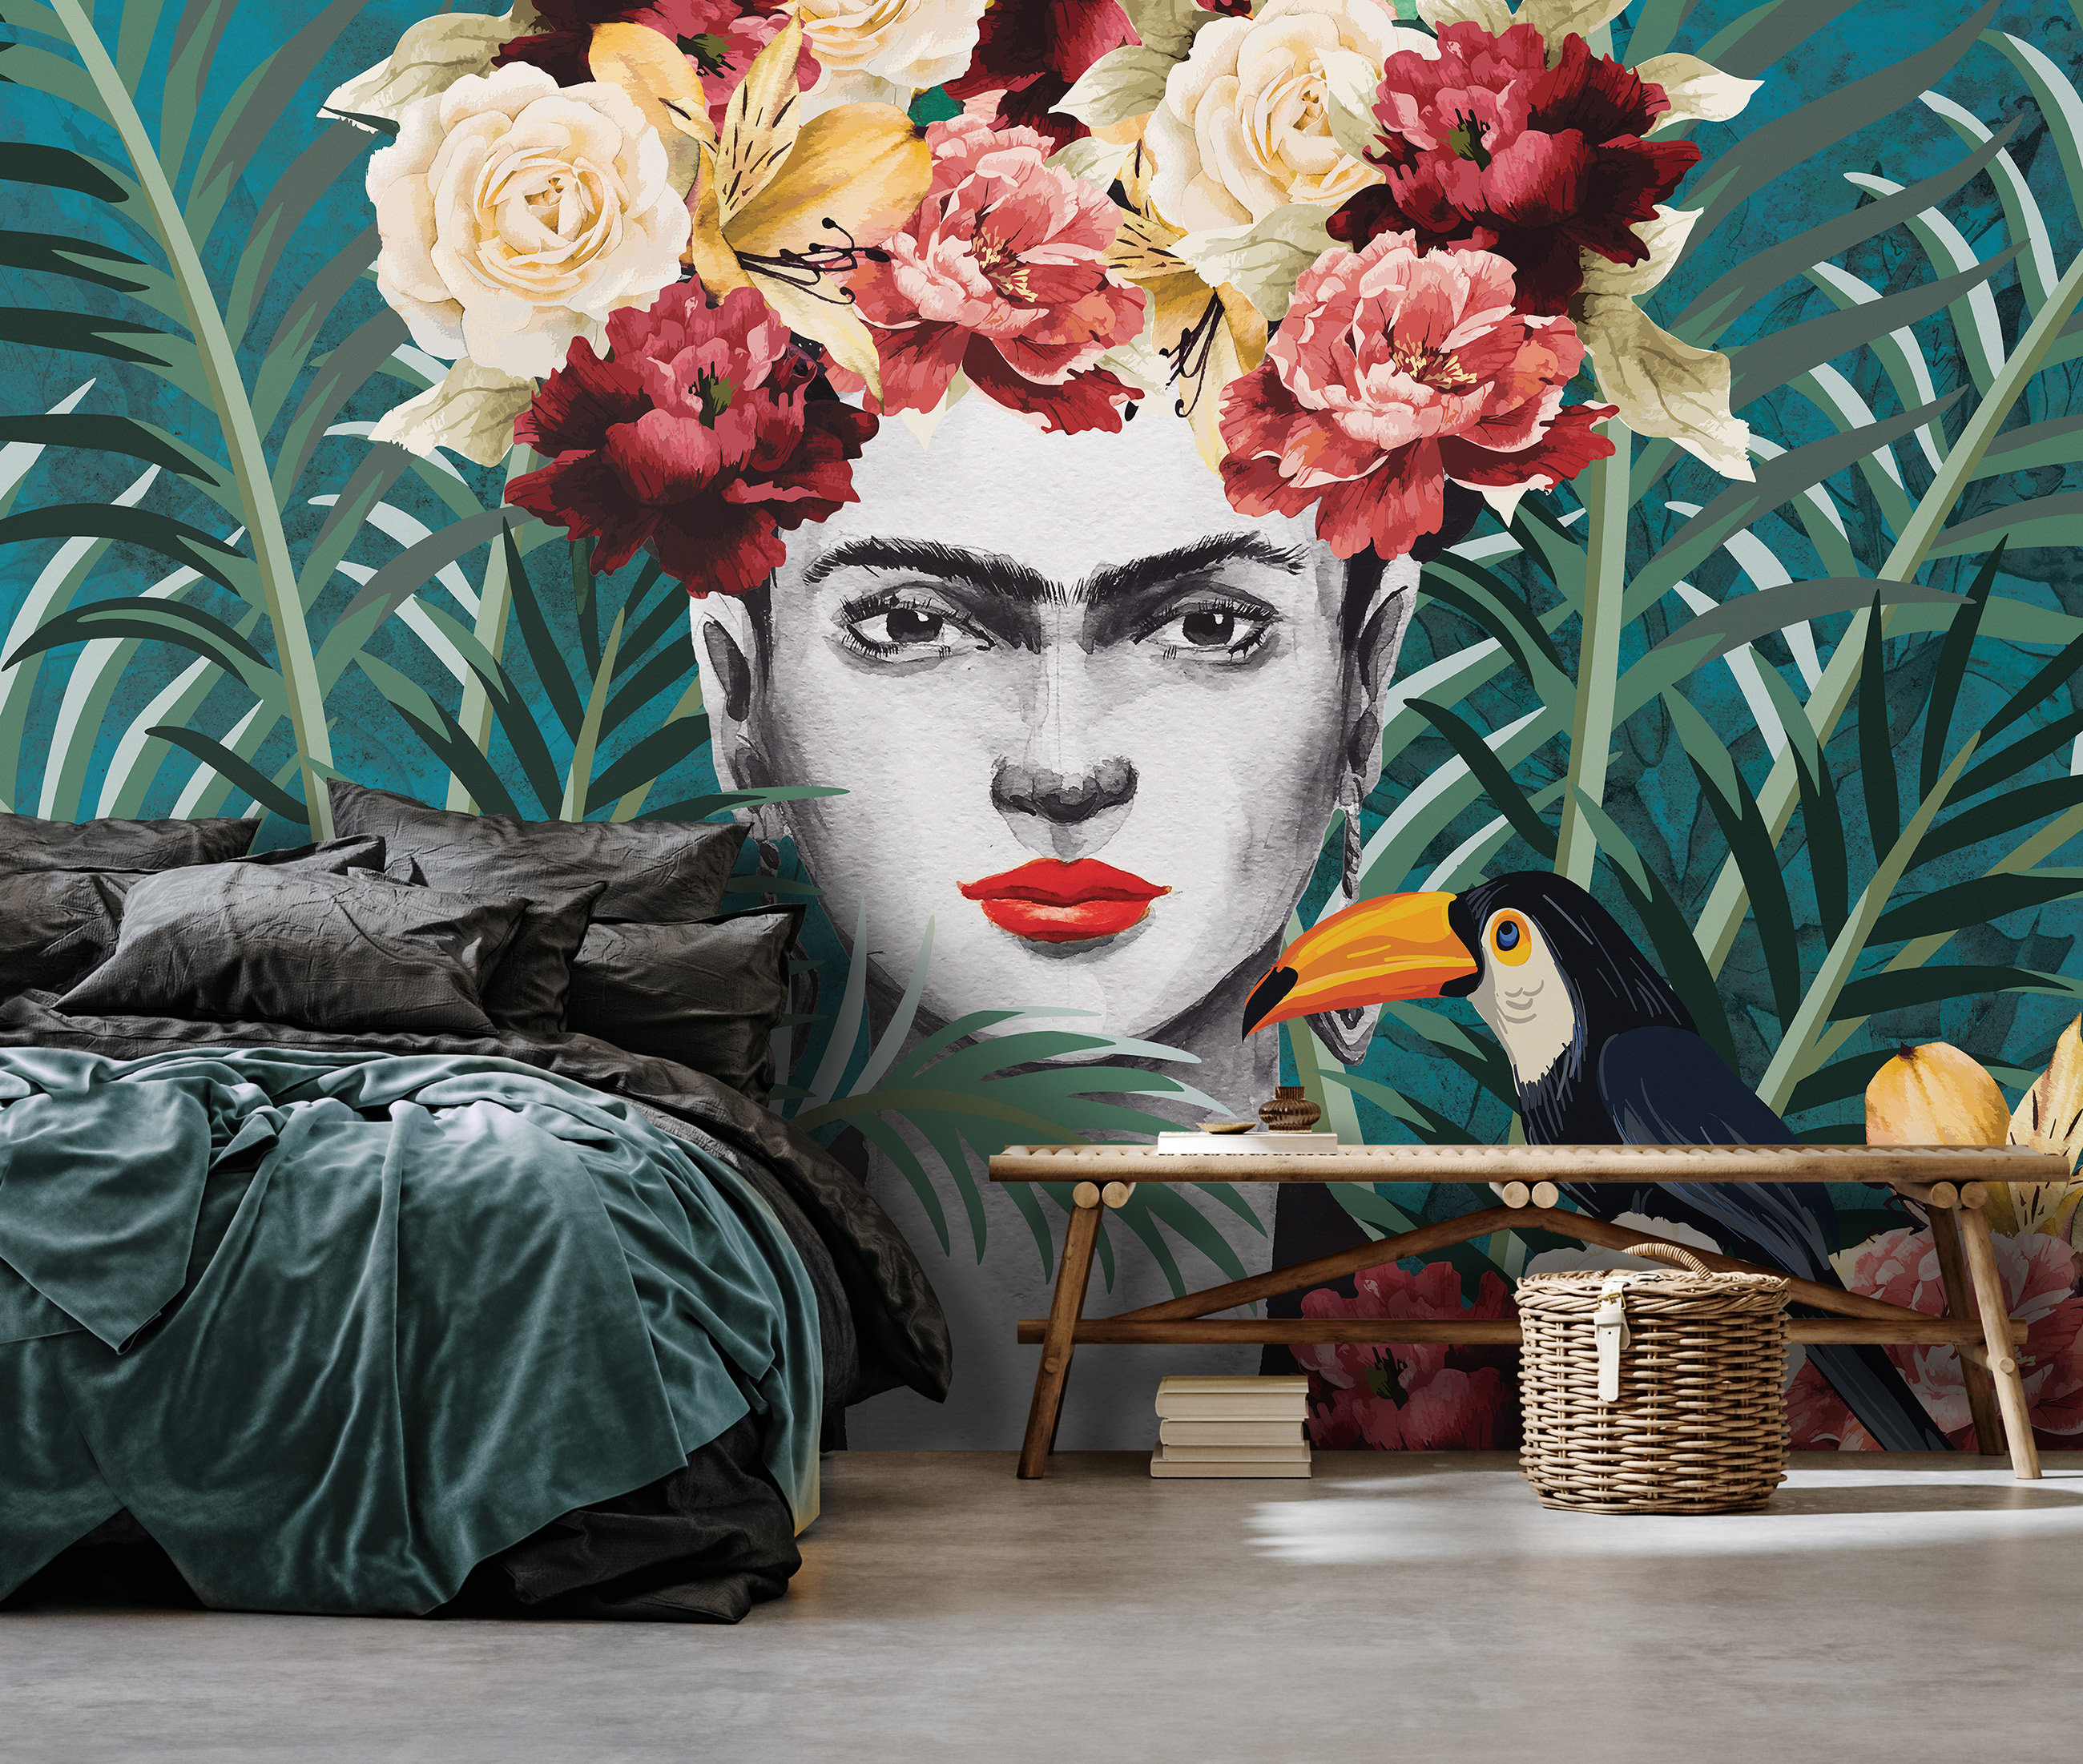 7 Mexican Floral Wallpaper Designs Inspired By Frida Khalo  Hovia  Kahlo  paintings Frida kahlo portraits Flower mural